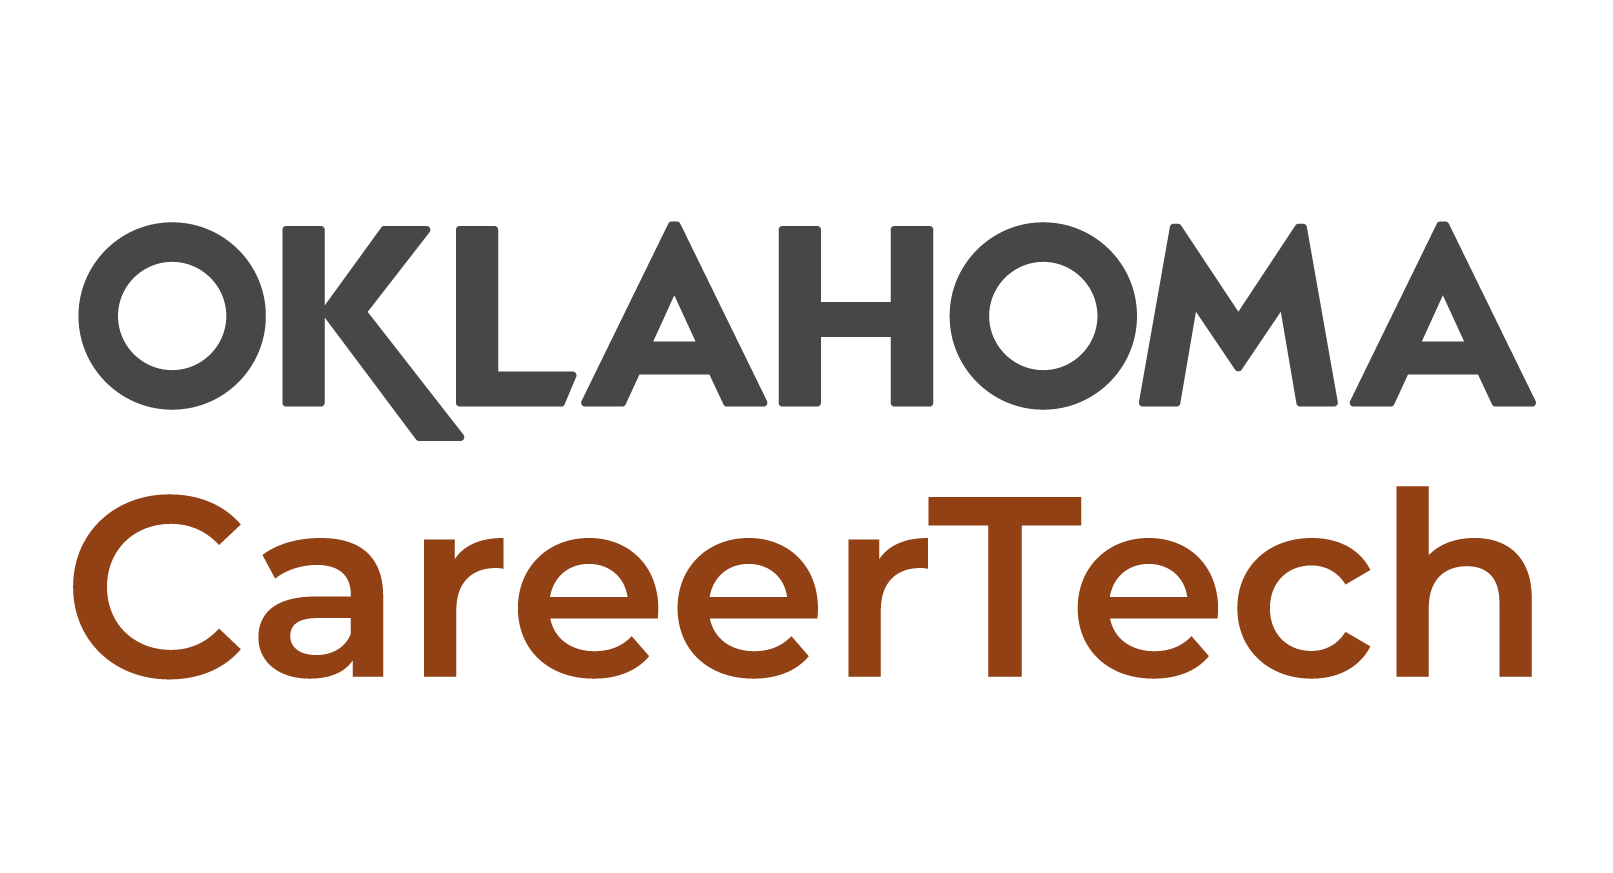 Oklahoma Business Relief Program Reporting - Oklahoma Department of Commerce